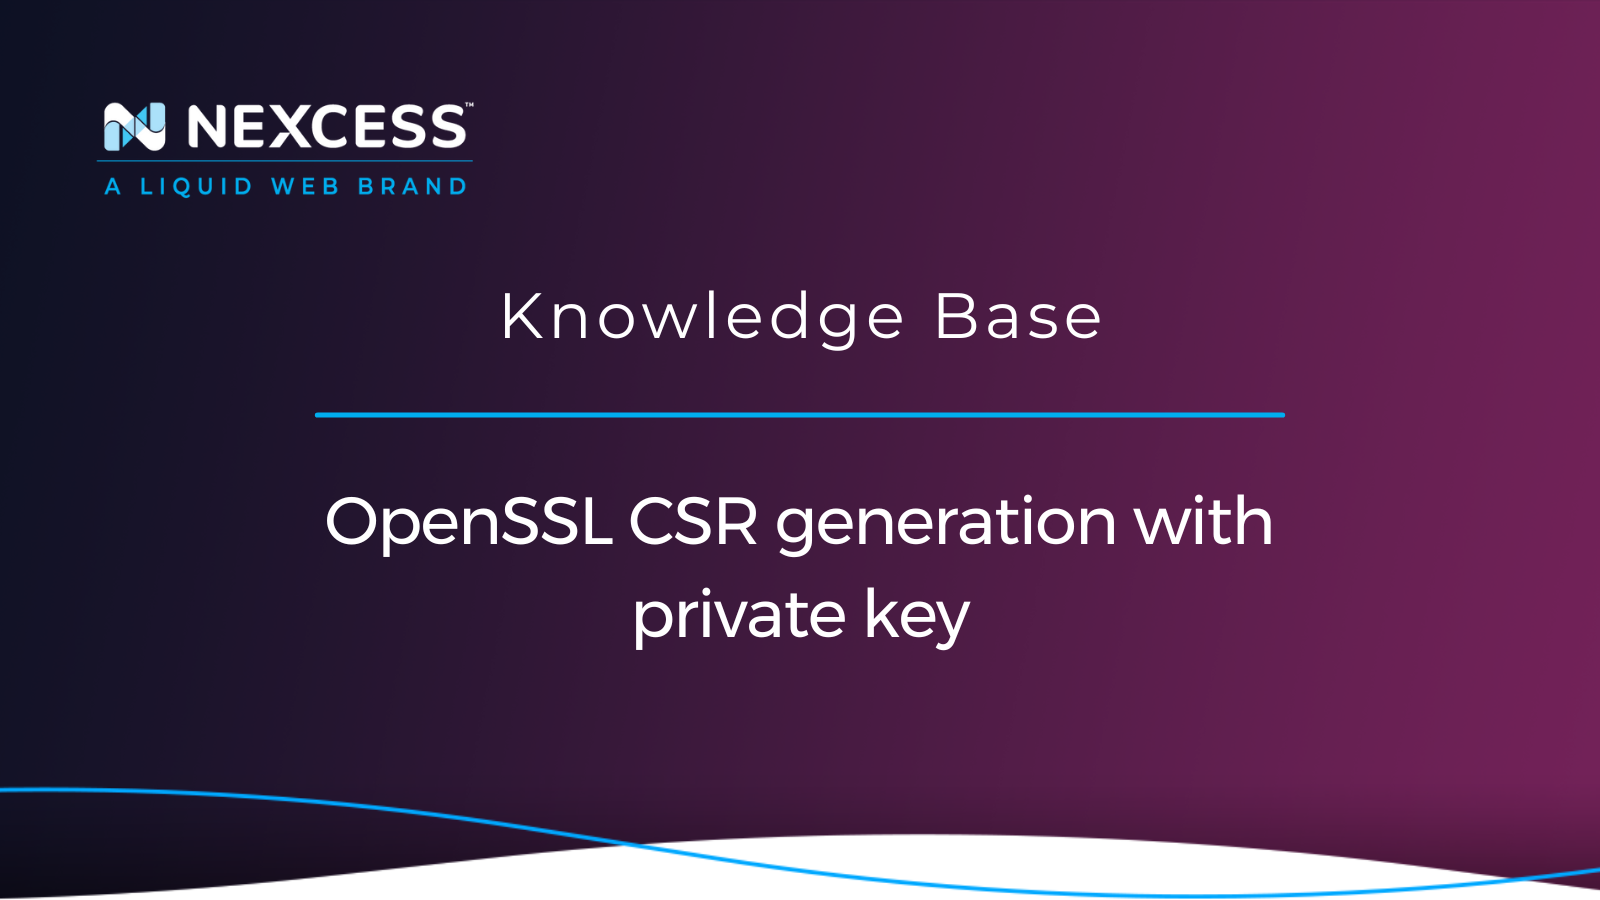 OpenSSL CSR generation with private key